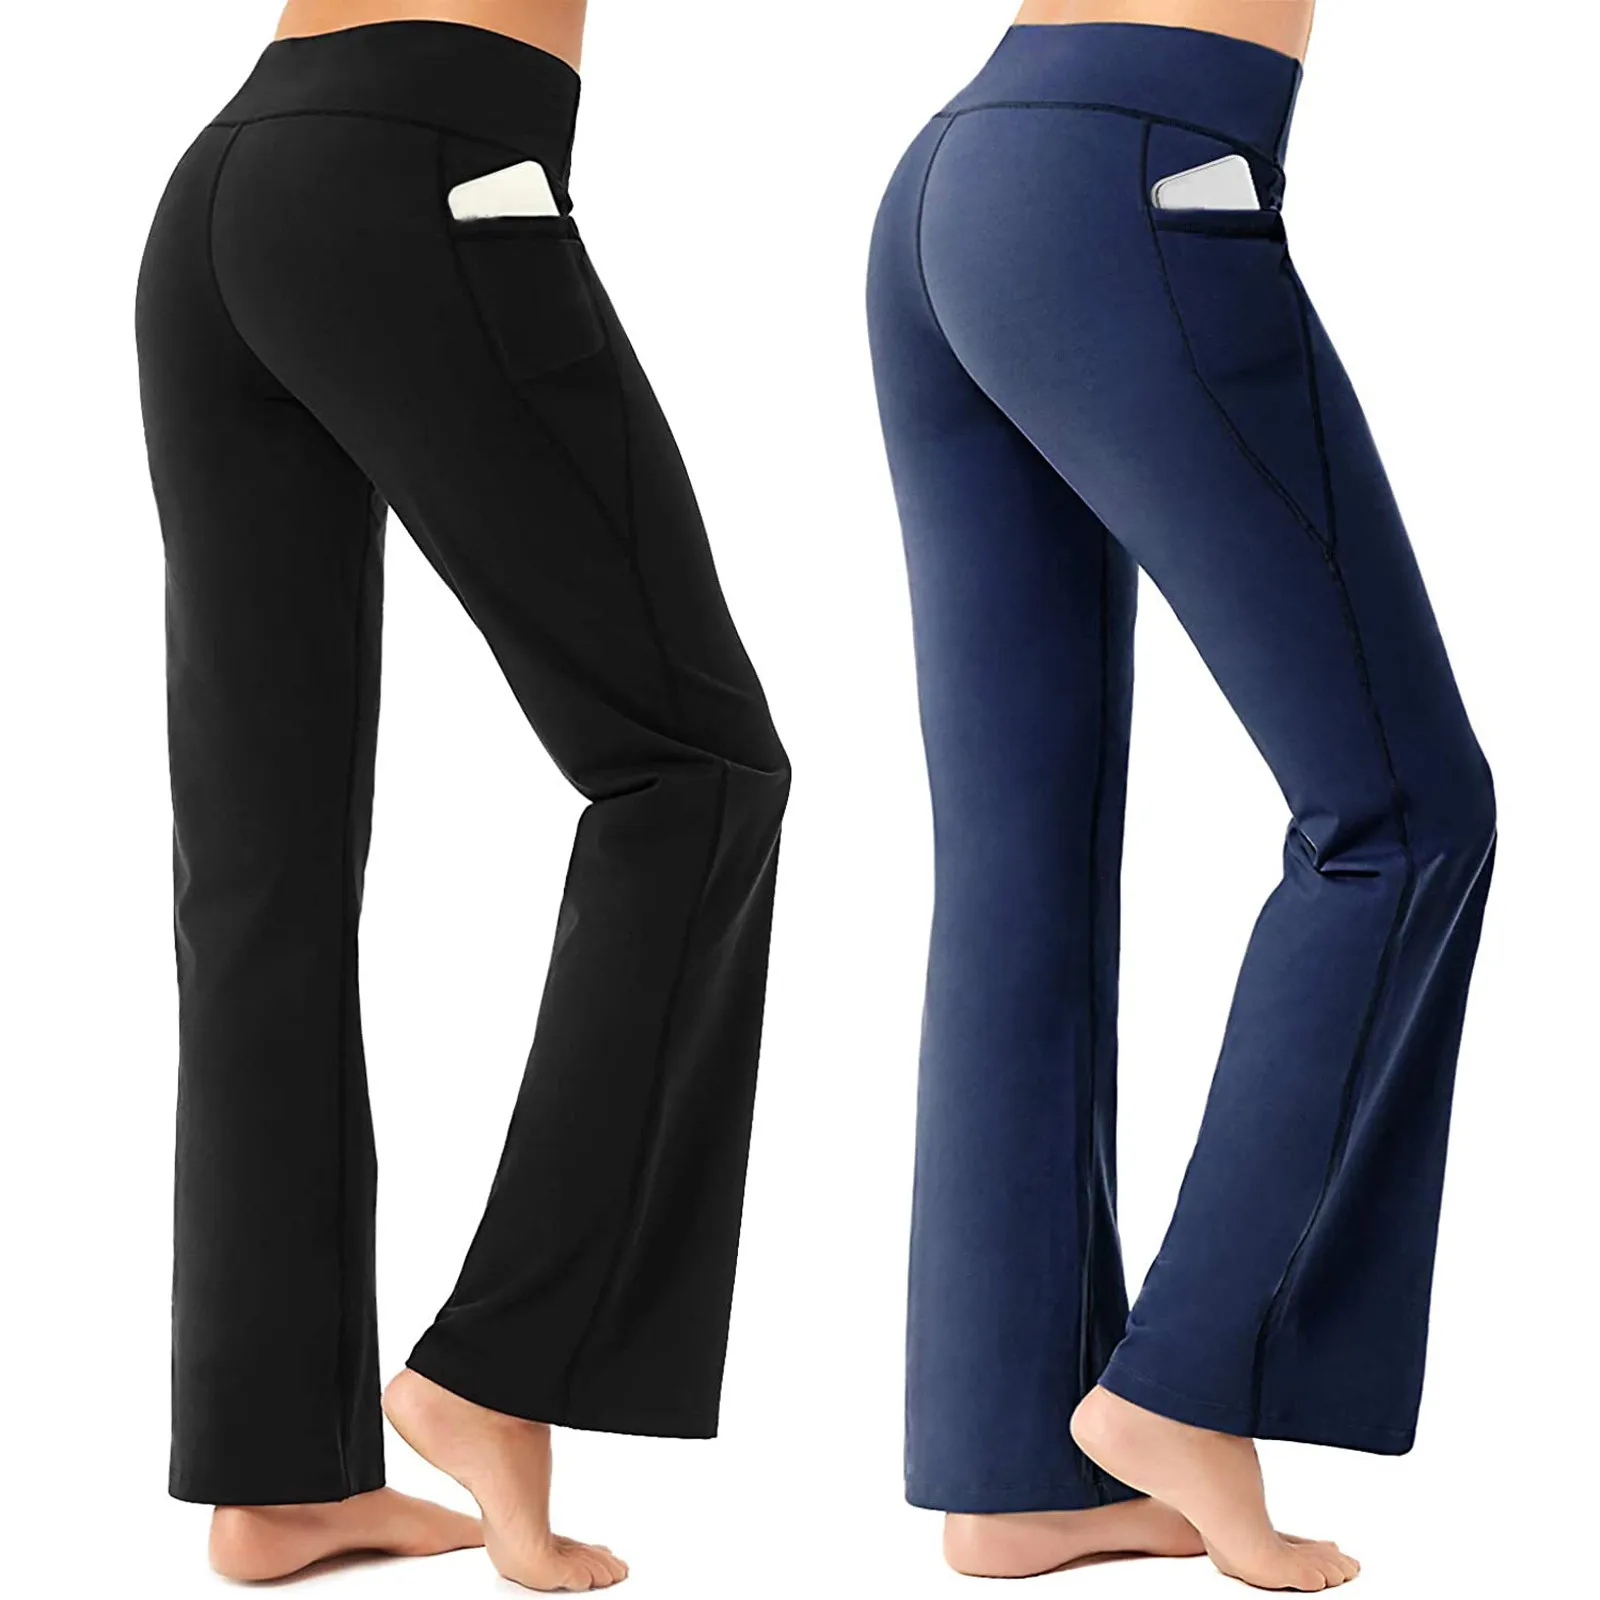 Womens Running Pants Sports Pants Fitness Pants Casual Trousers feature Trousers Capri Jazz Yoga 